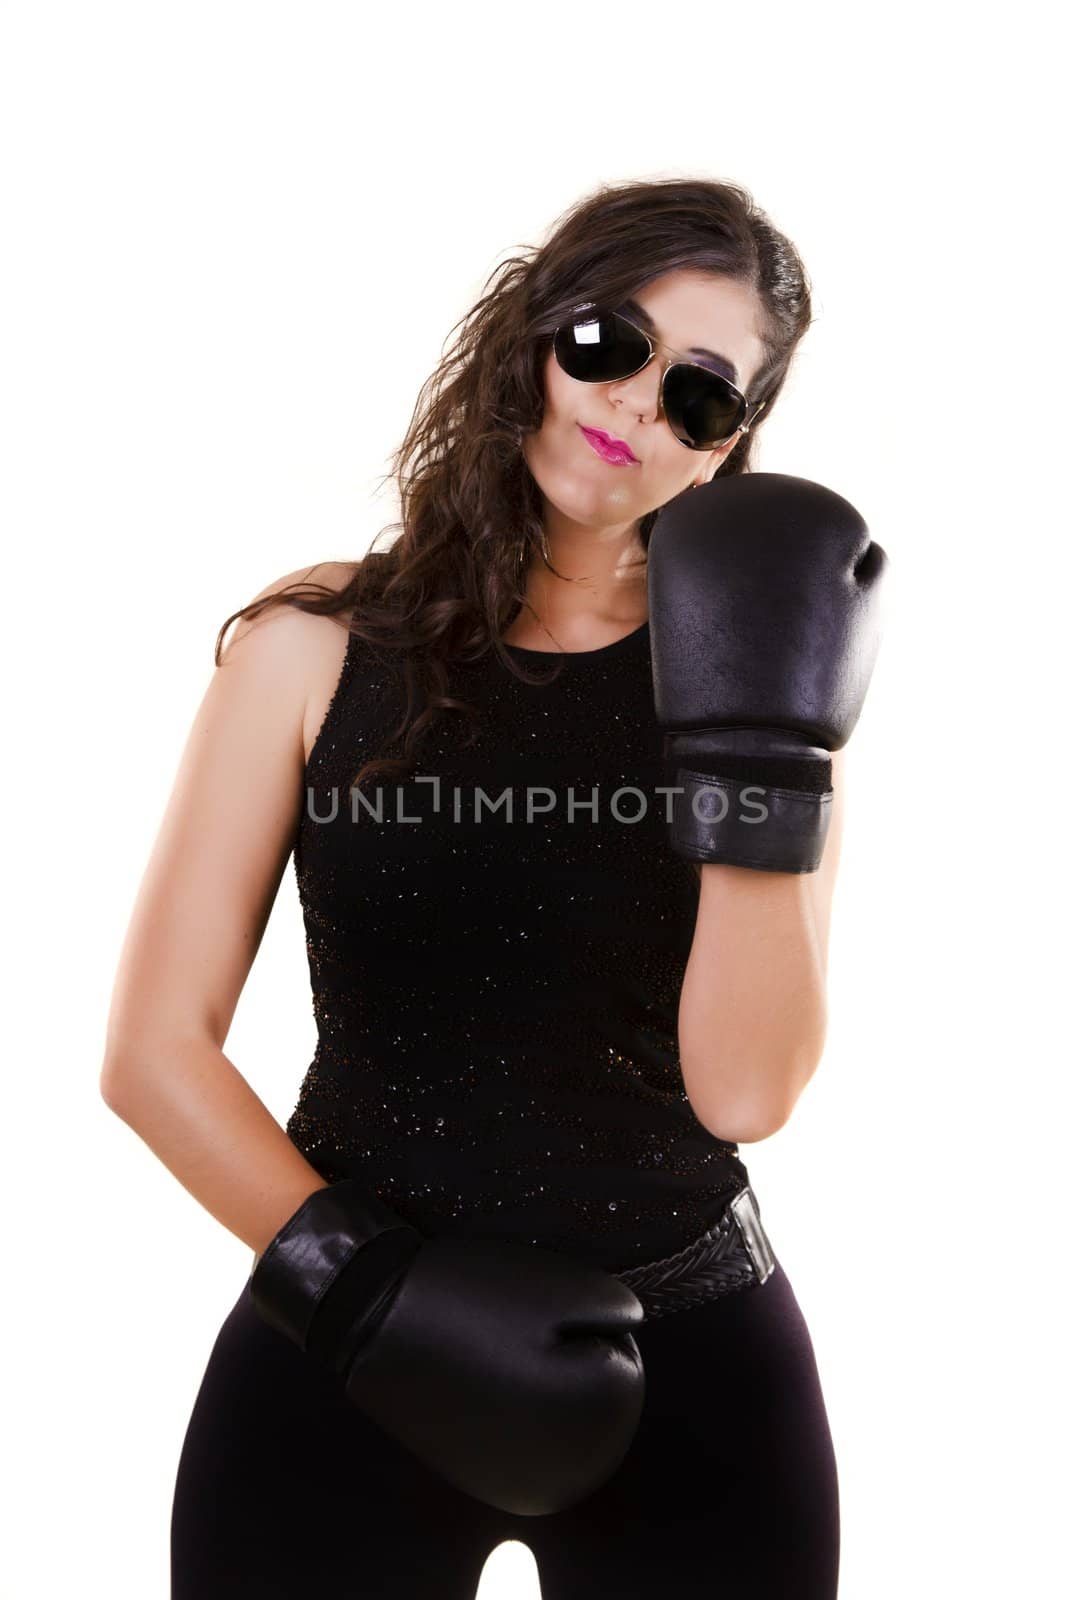 View of a beautiful girl in dark leather clothes against a white background with boxing gloves.